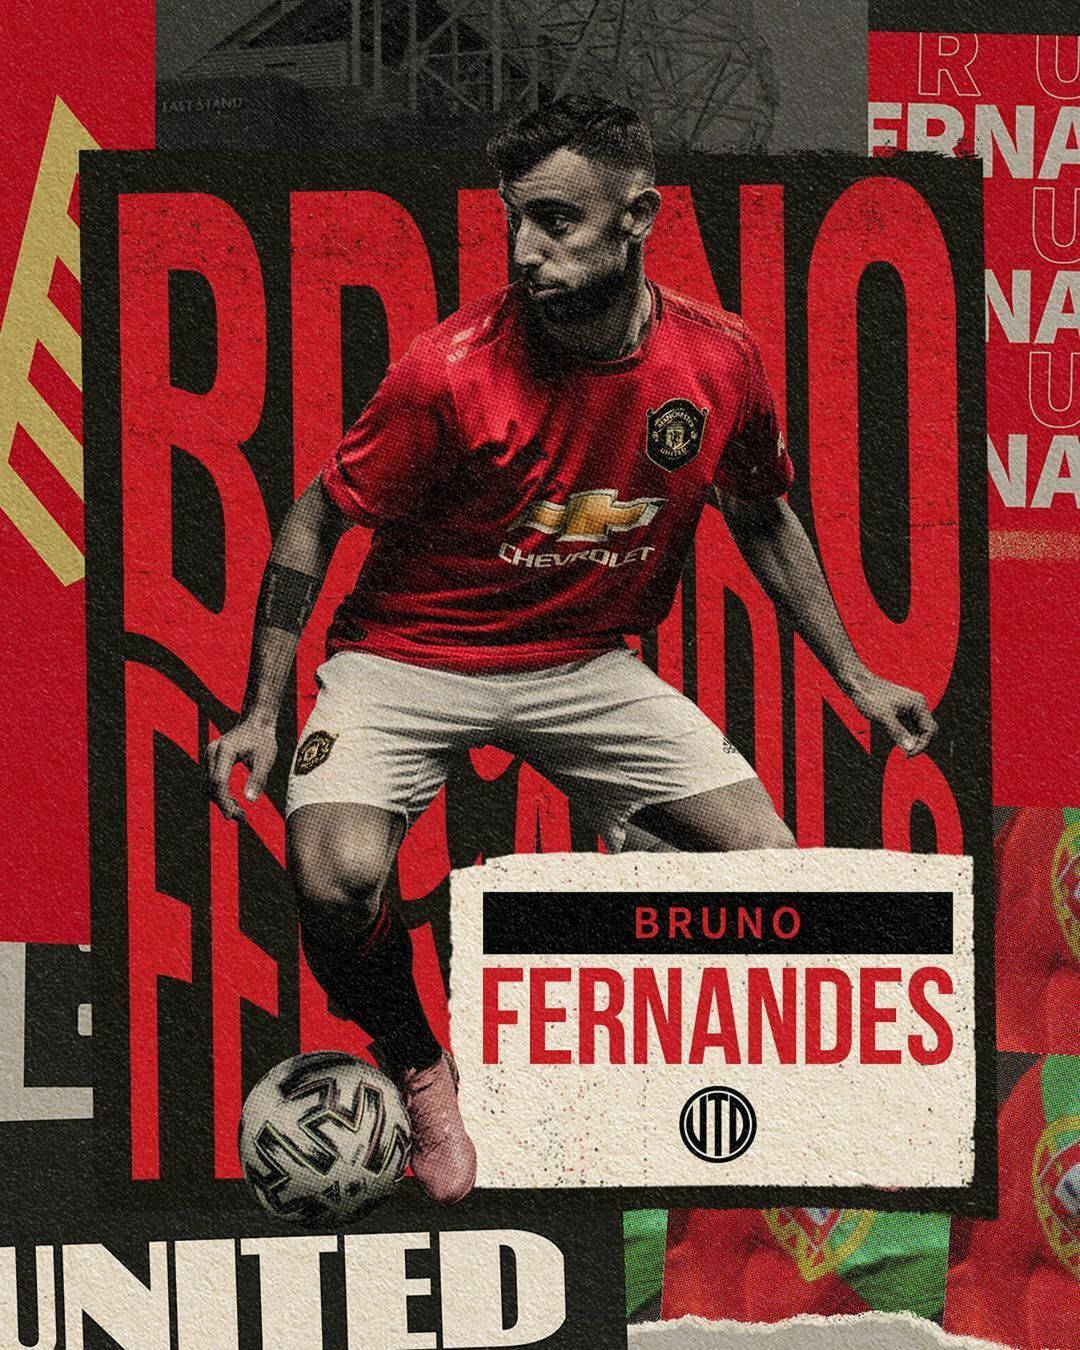 Top 999+ Bruno Fernandes Manchester United Wallpapers Full HD, 4K✅Free to Use